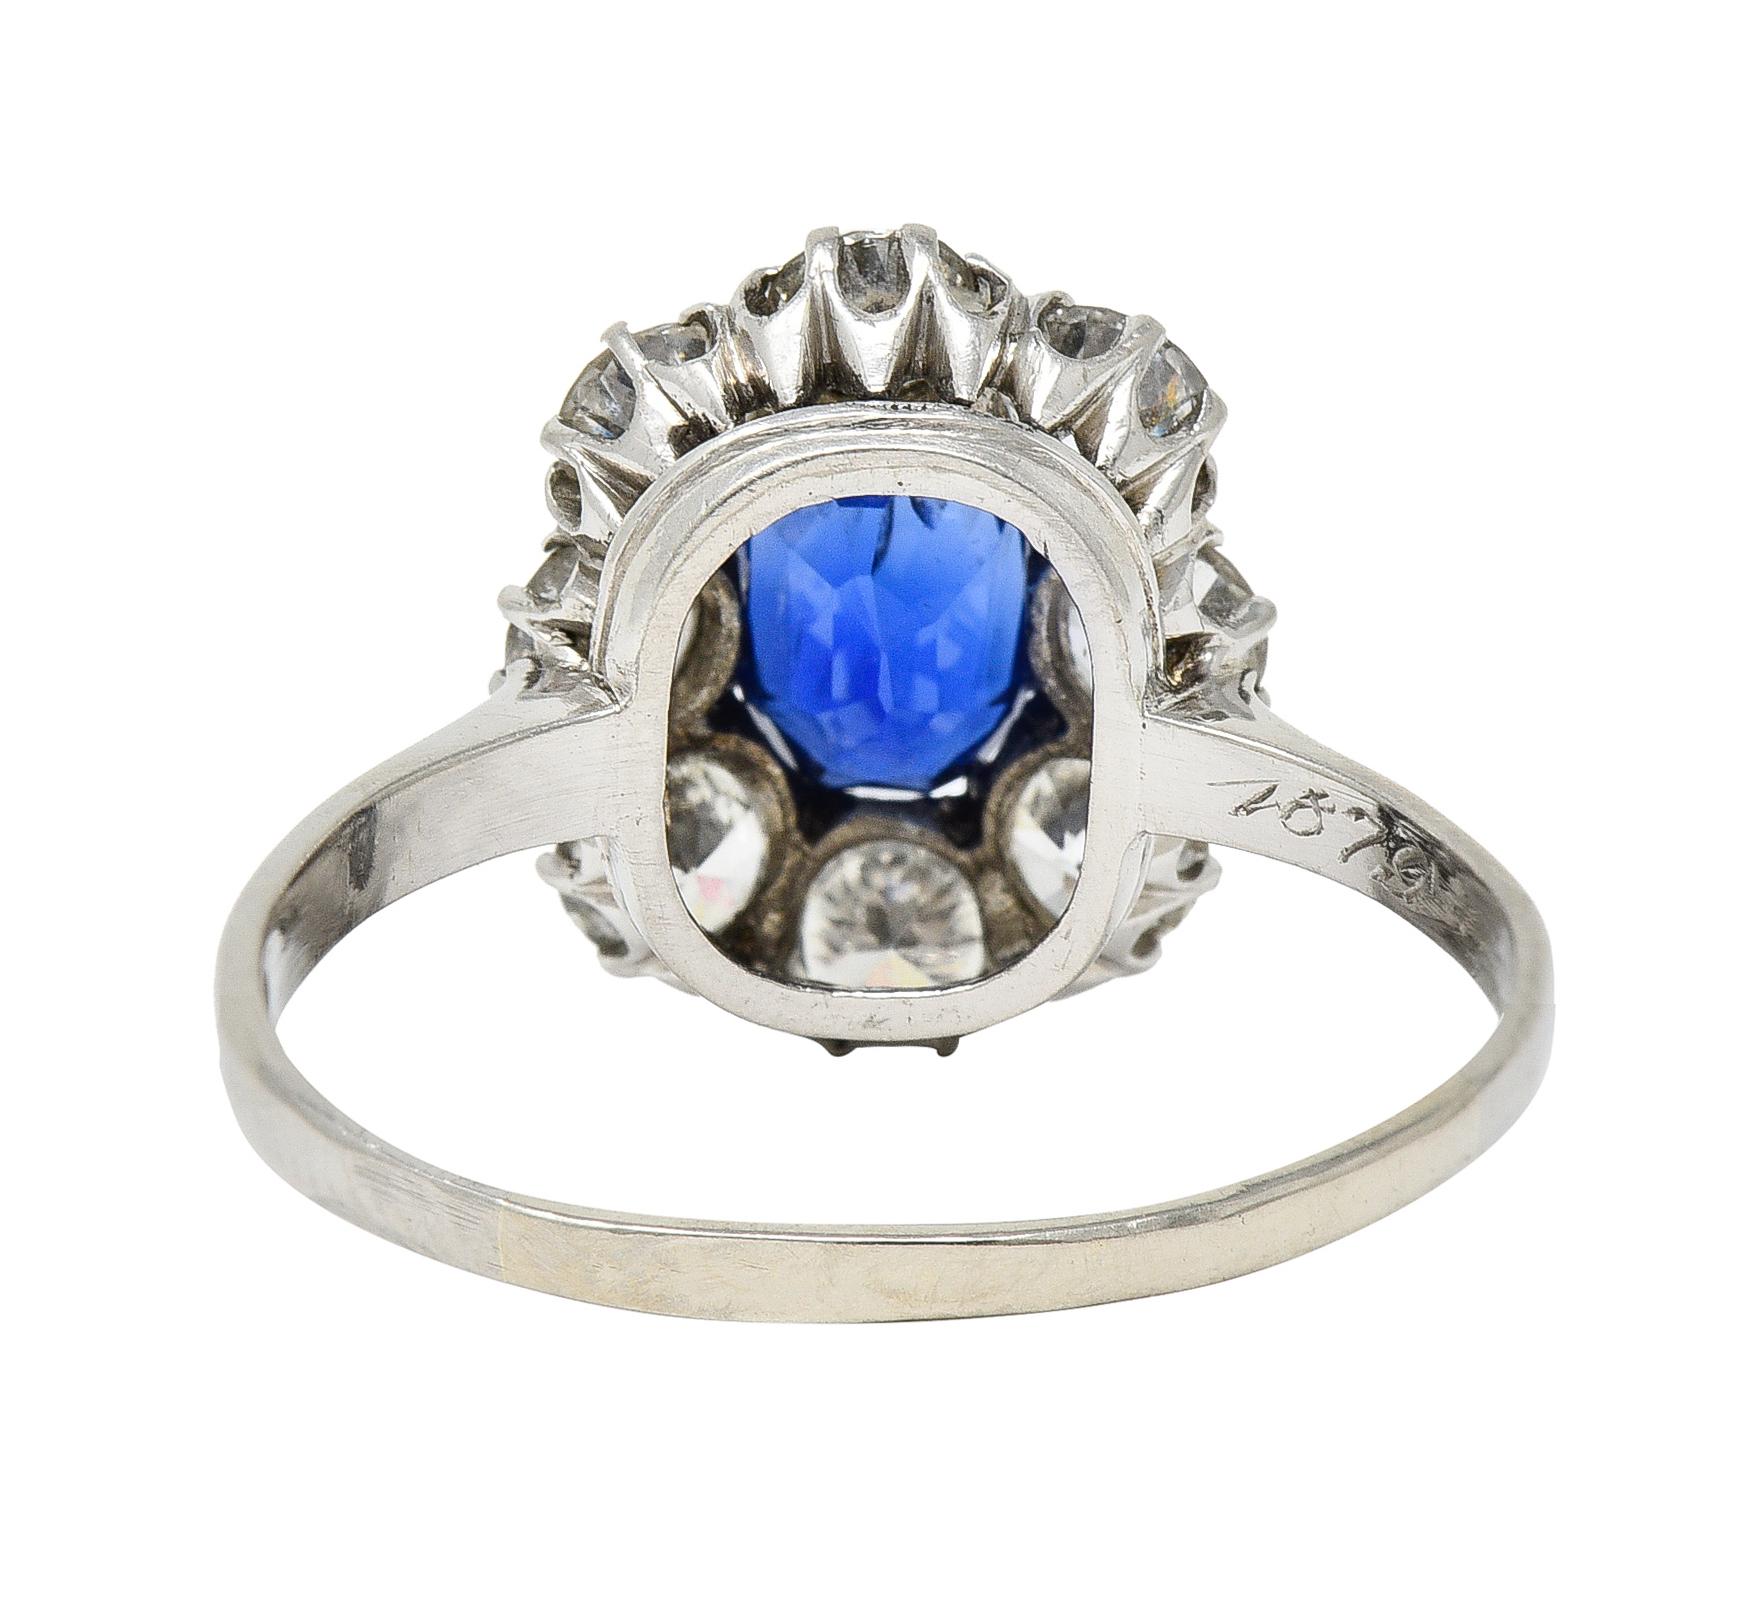 Edwardian 2.48 Carats No Heat Burma Sapphire Diamond Platinum Halo Ring GIA In Excellent Condition For Sale In Philadelphia, PA